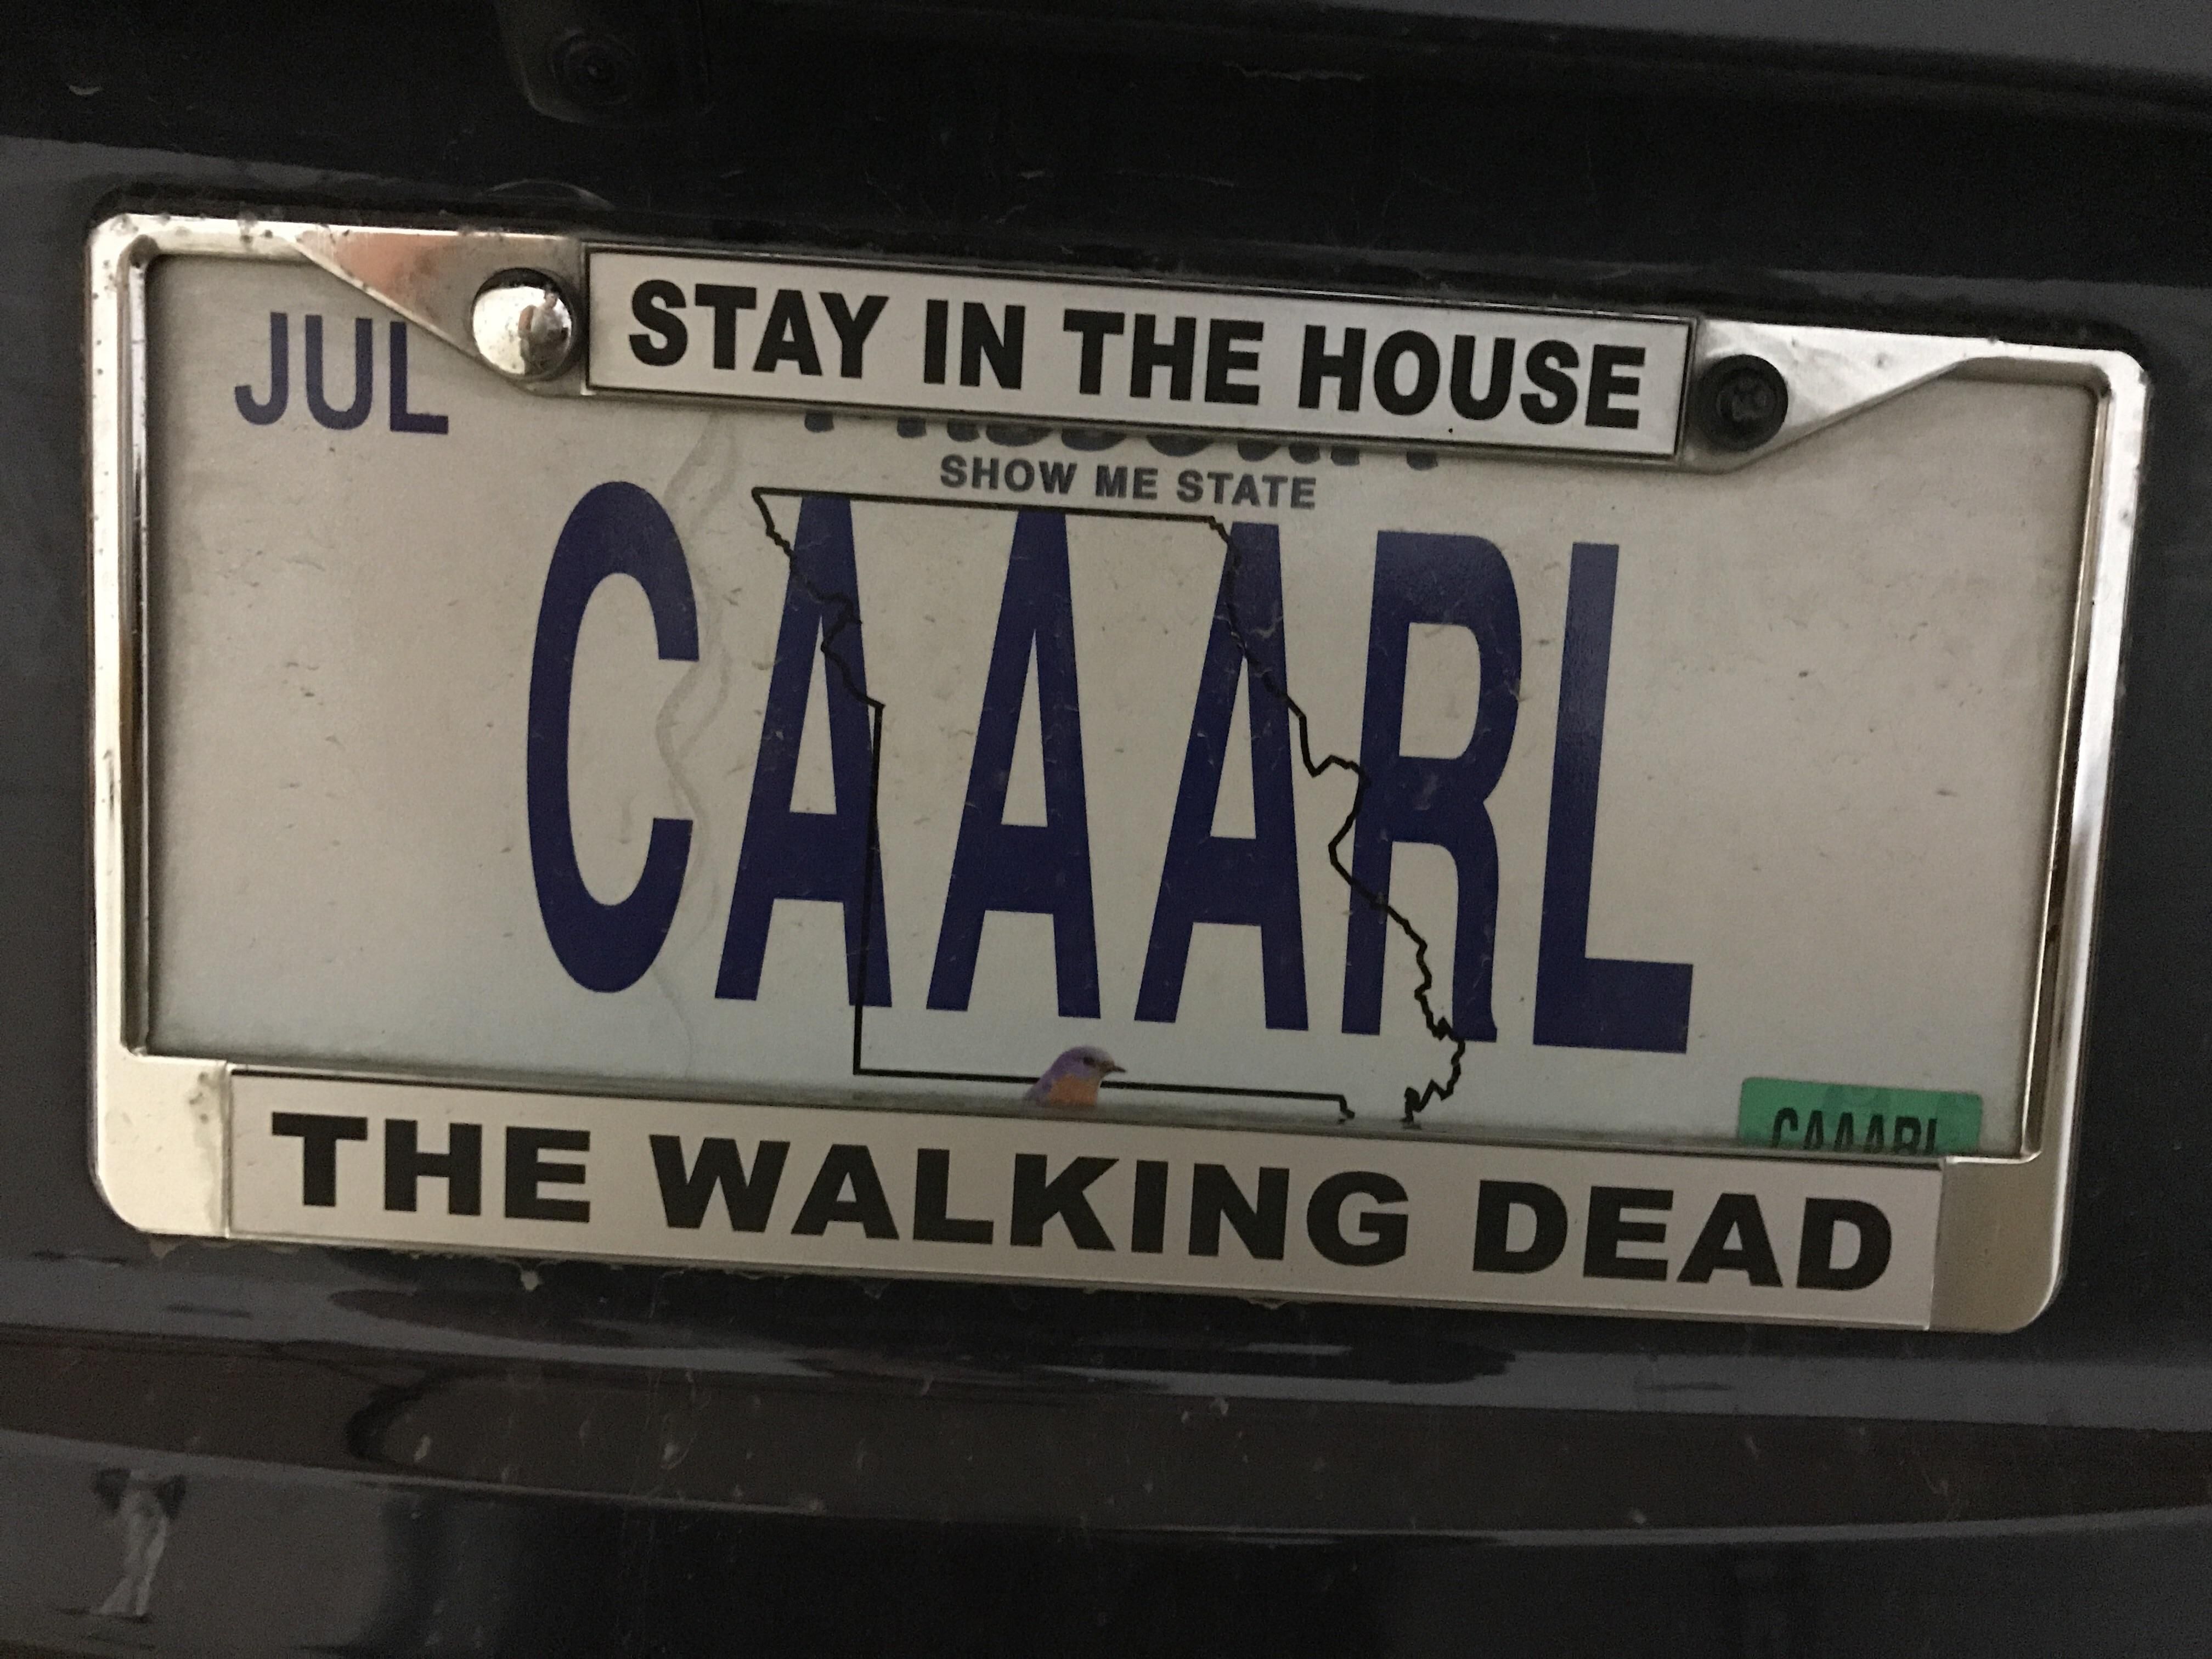 This is my license plate. Thought some of you would like it.